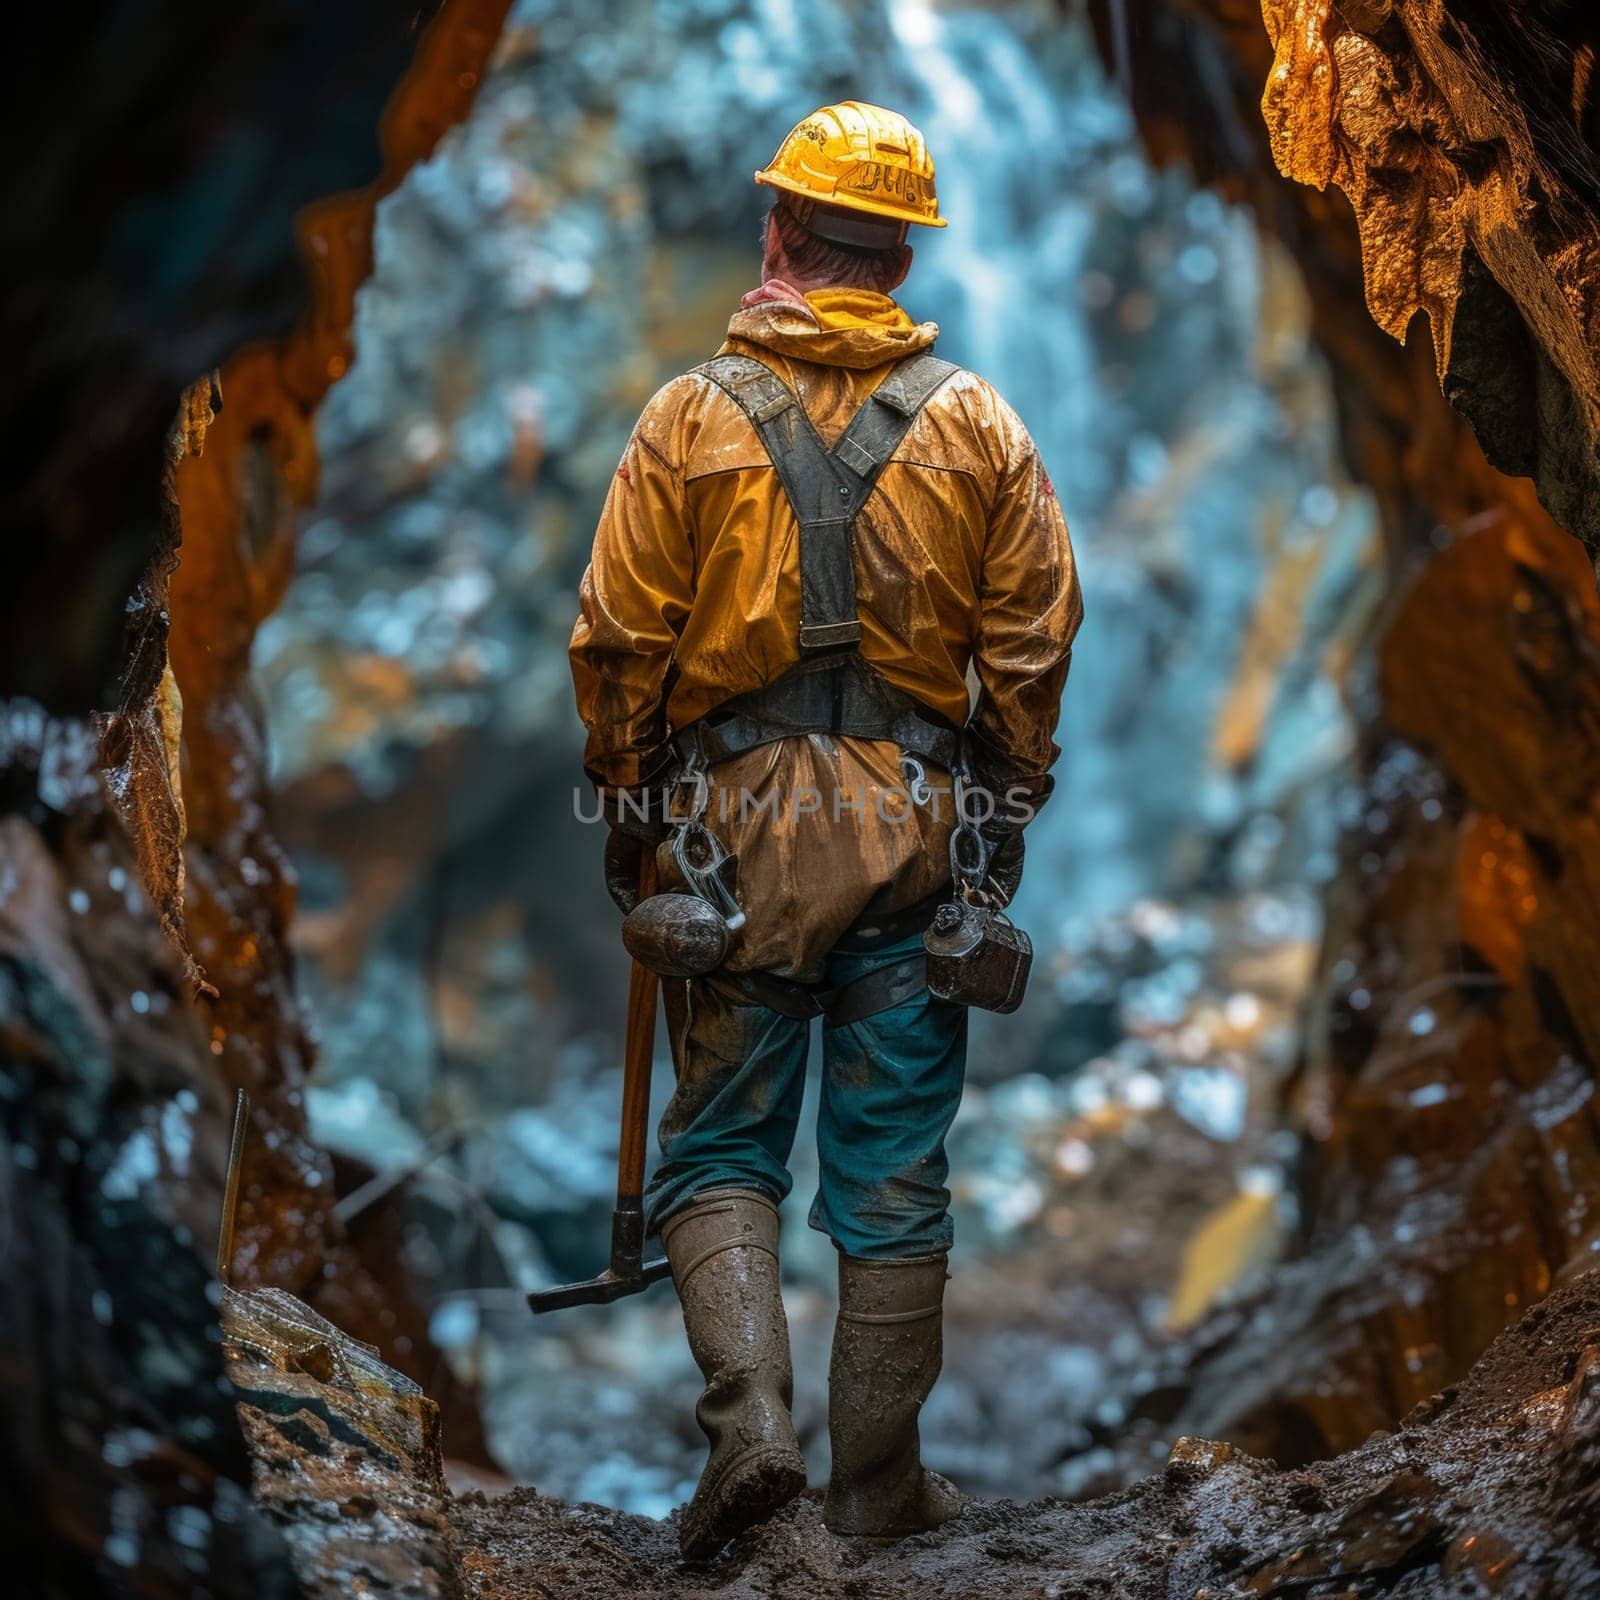 Miner in reflective gear standing in a mine shaft, contemplating the ore-rich passage